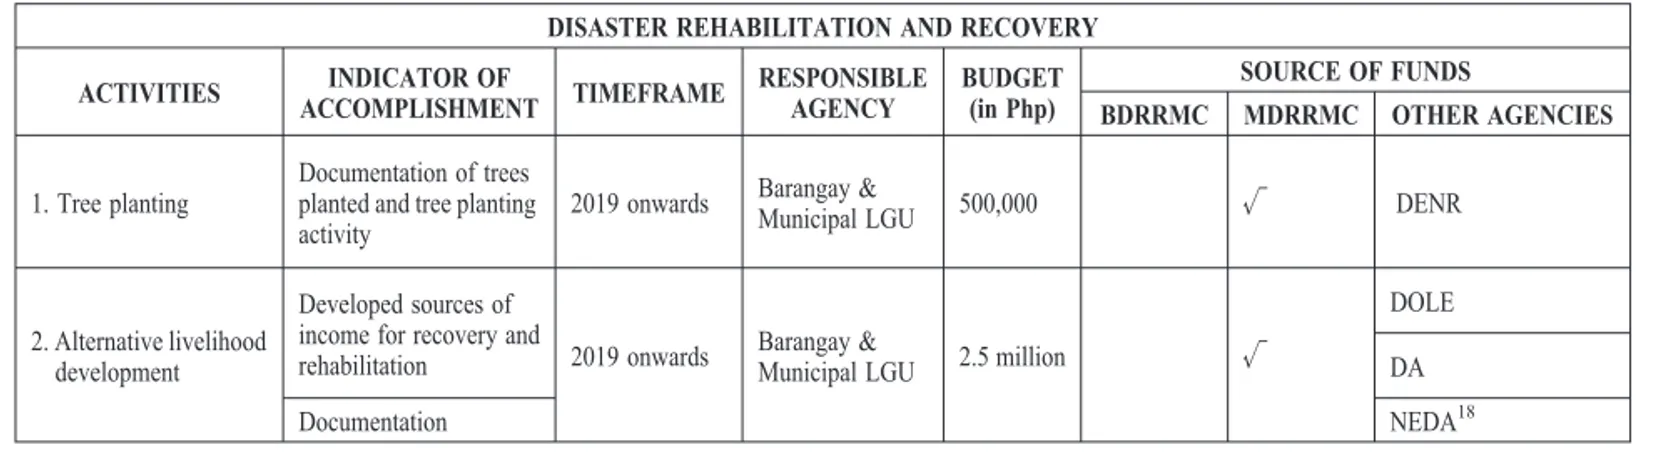 Table 11. Disaster rehabilitation and recovery plan for typhoon.